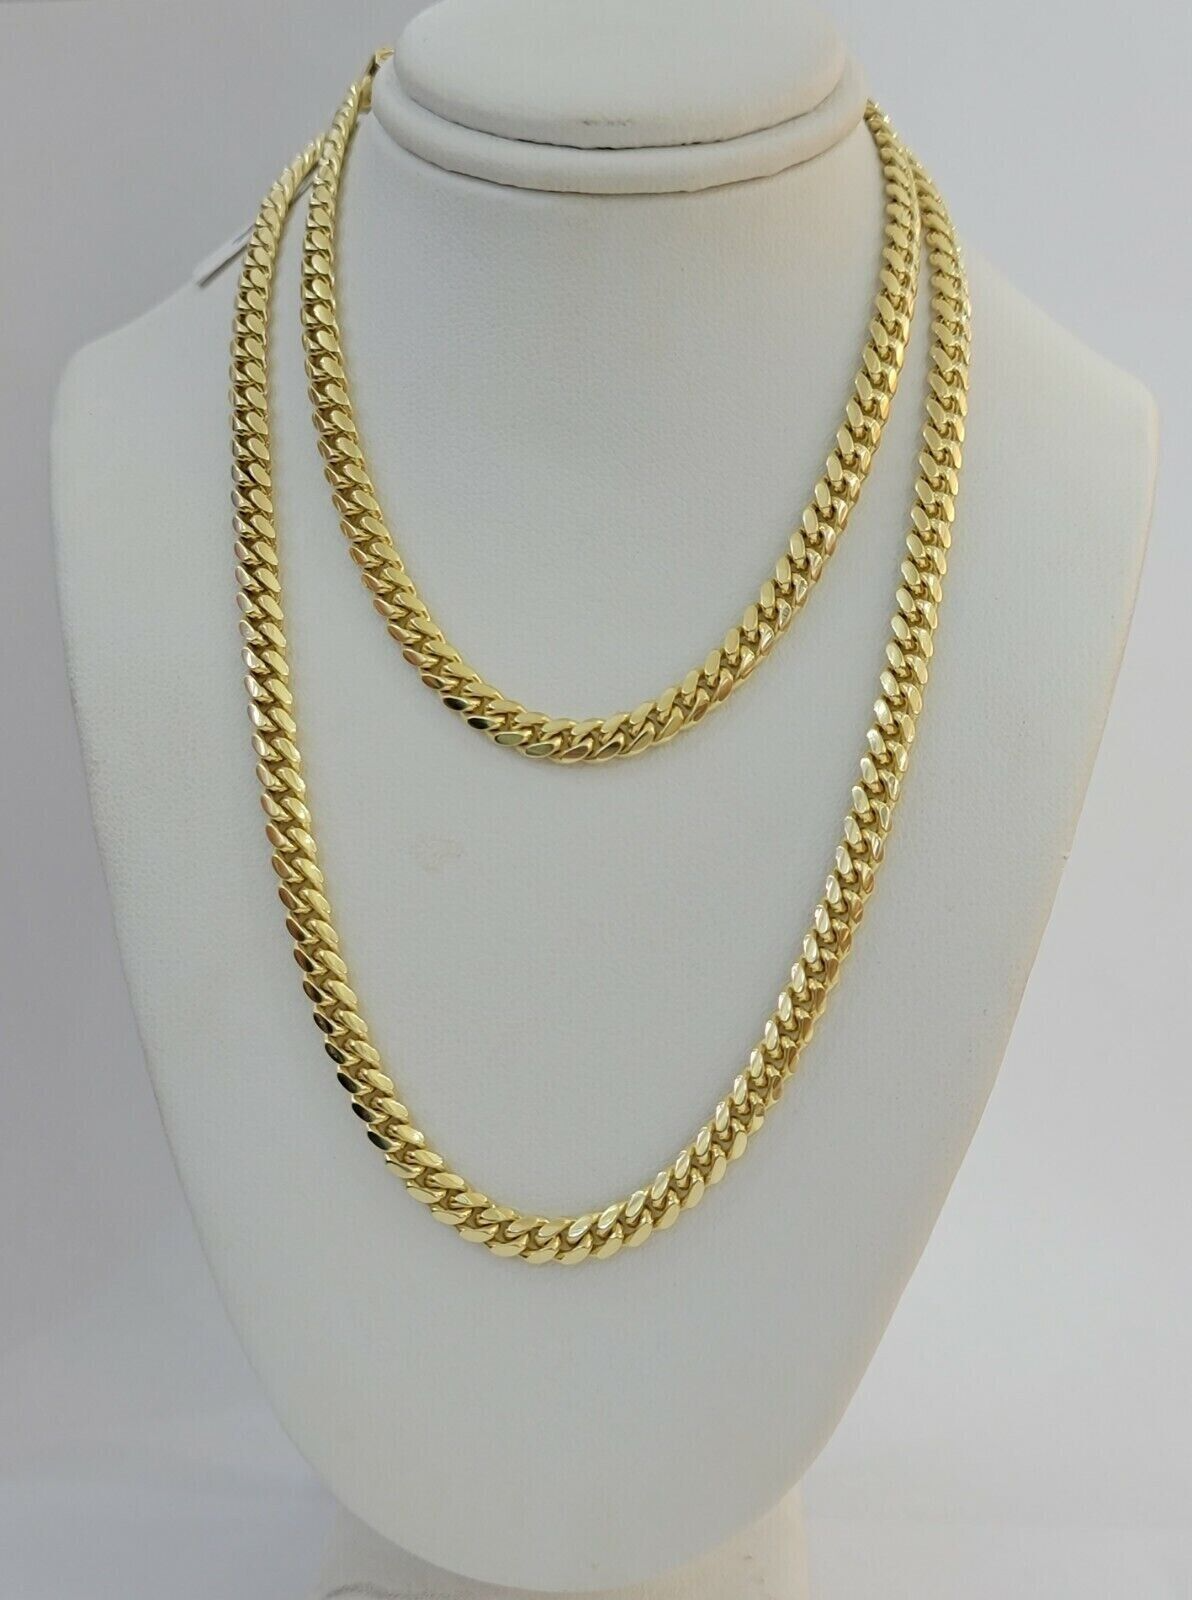 Solid 14k yellow Gold Miami Cuban link chain 24 Inch 4mm Necklace STRONG Links